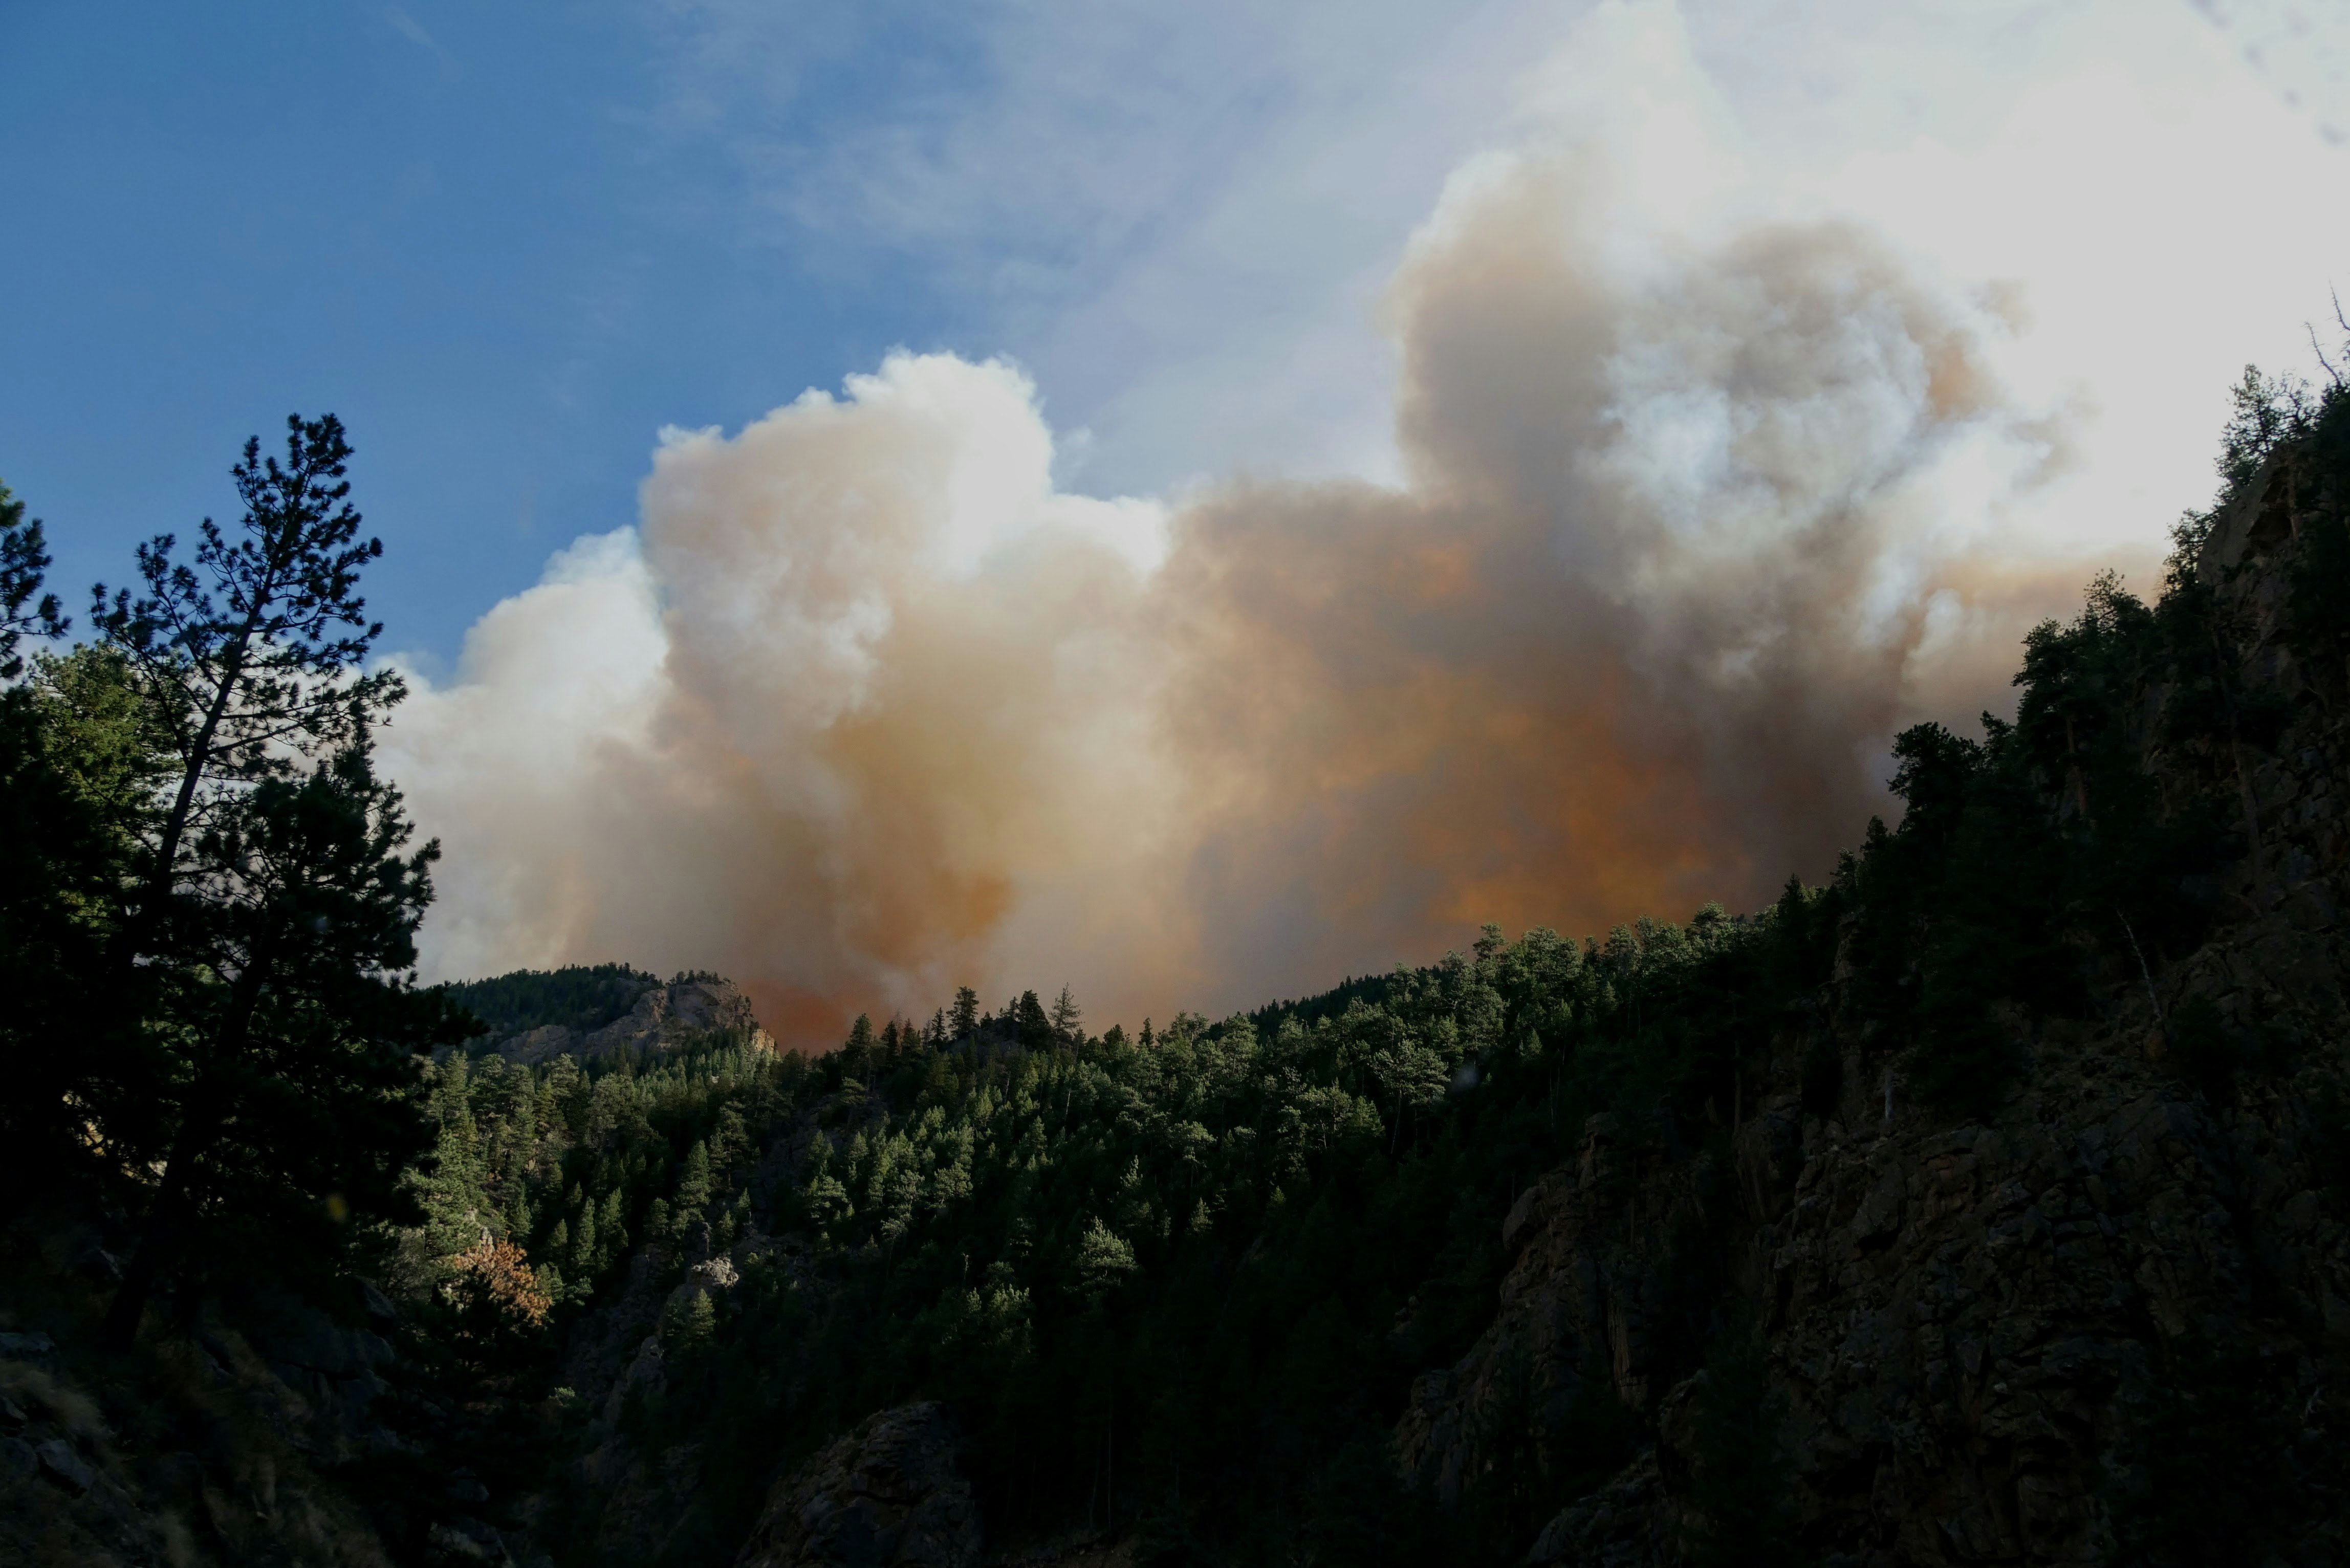 Taken on the day the calwood fire started from the peak to peak highway. Showing the smoke plume created from the fire after growing to 8000 acres within the first 5 hours.